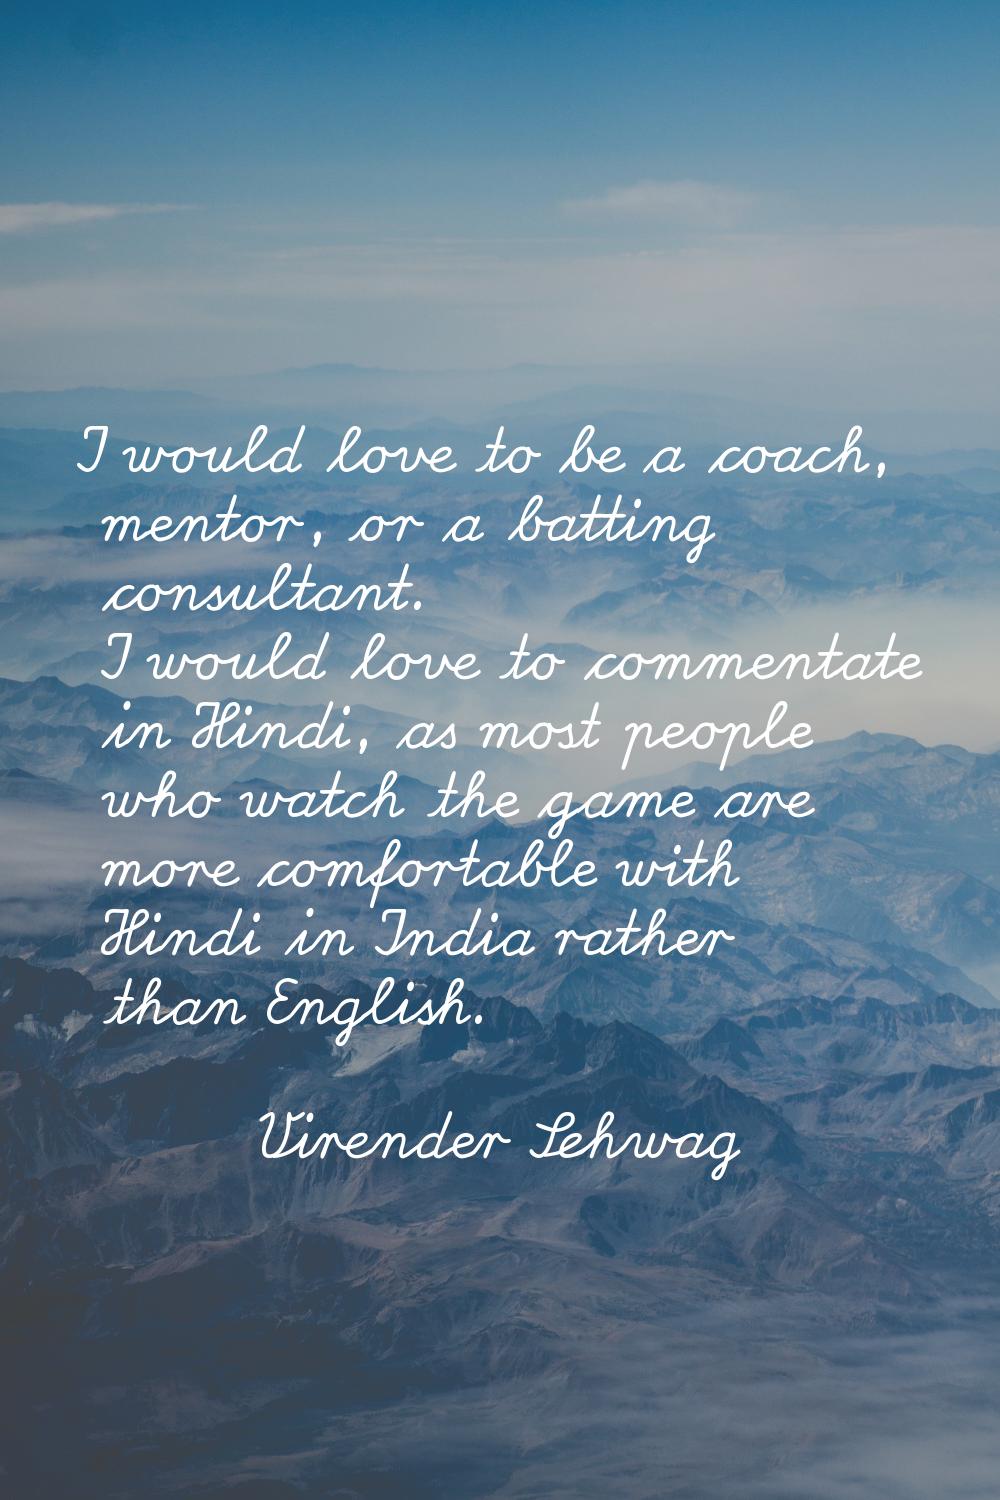 I would love to be a coach, mentor, or a batting consultant. I would love to commentate in Hindi, a